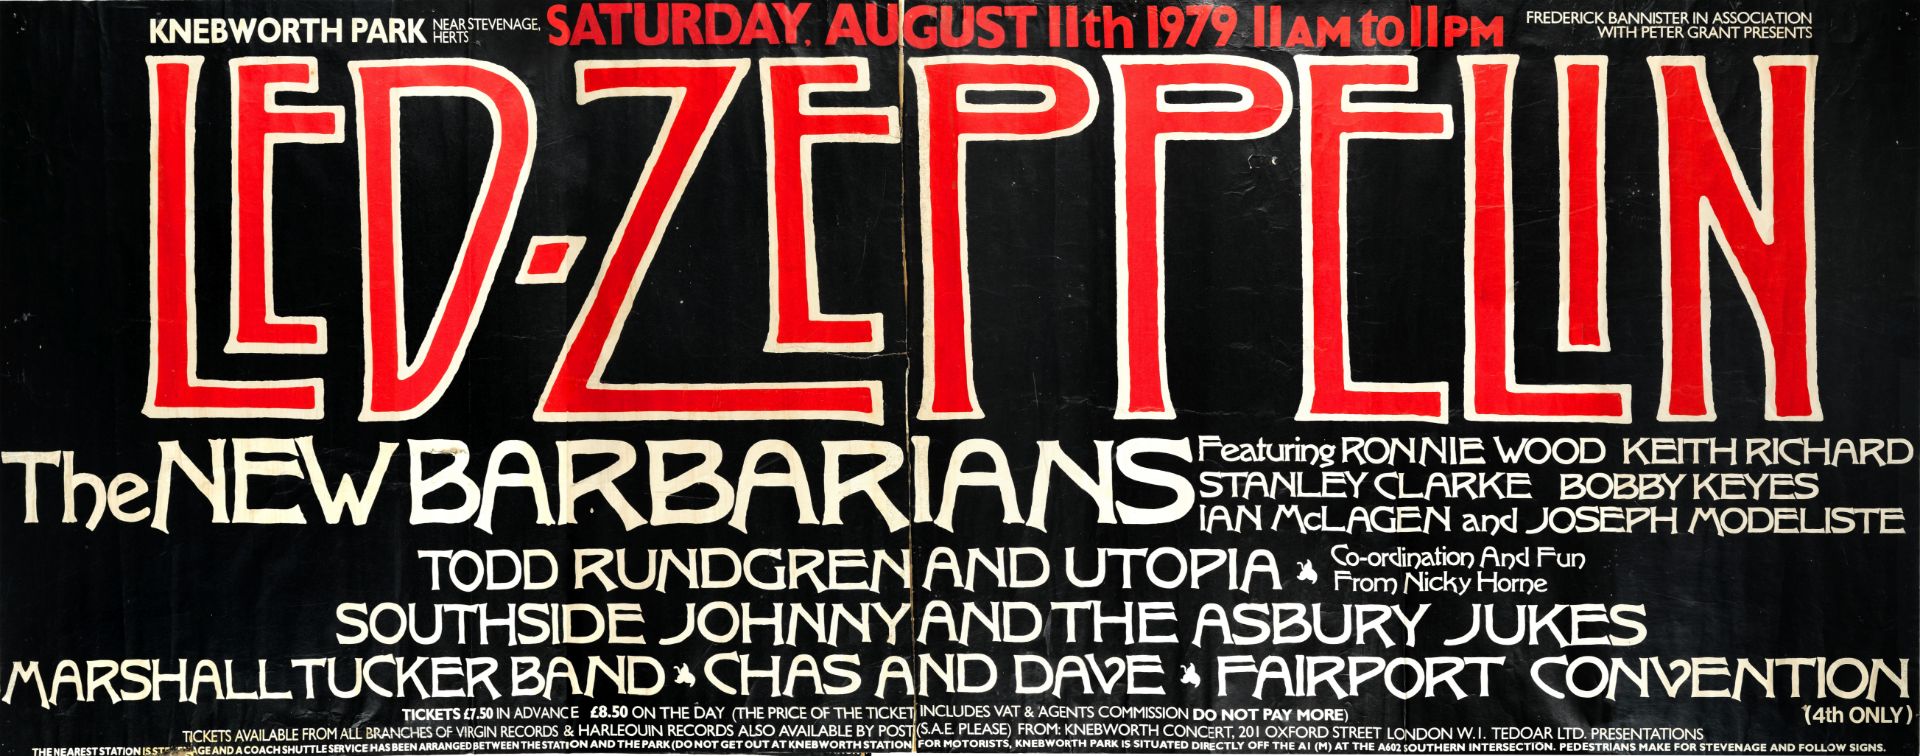 Led Zeppelin: A Large And Rare Knebworth Concert Poster, Saturday 11th August 1979,